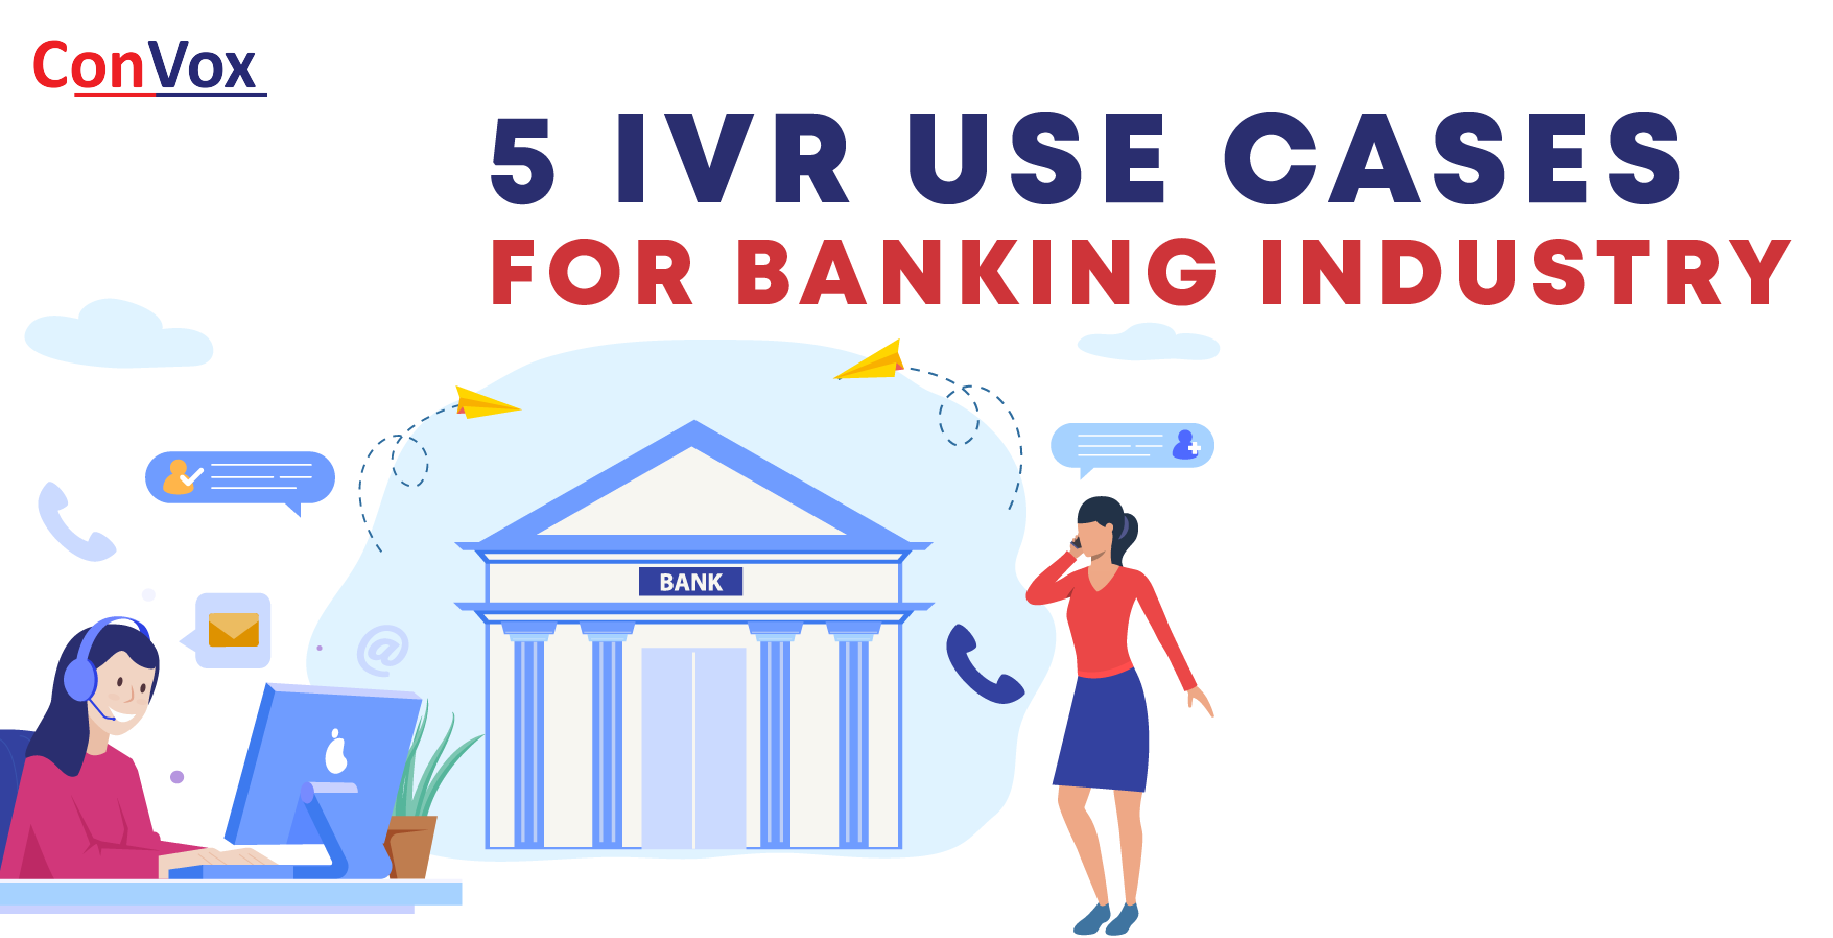 5 Ivr Use Cases For Banking Industry